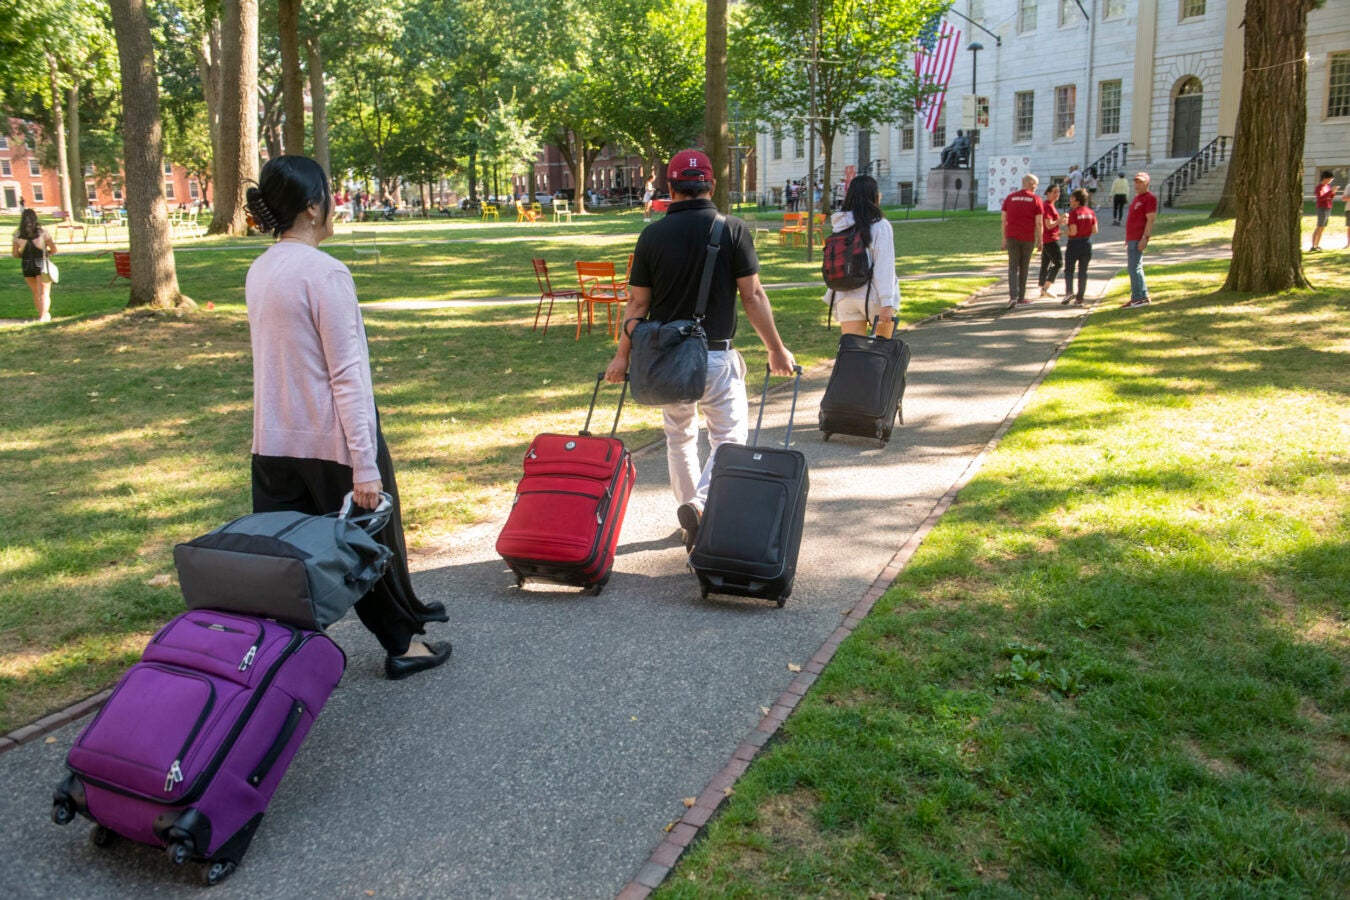 Students bring suitcases into the Yard.